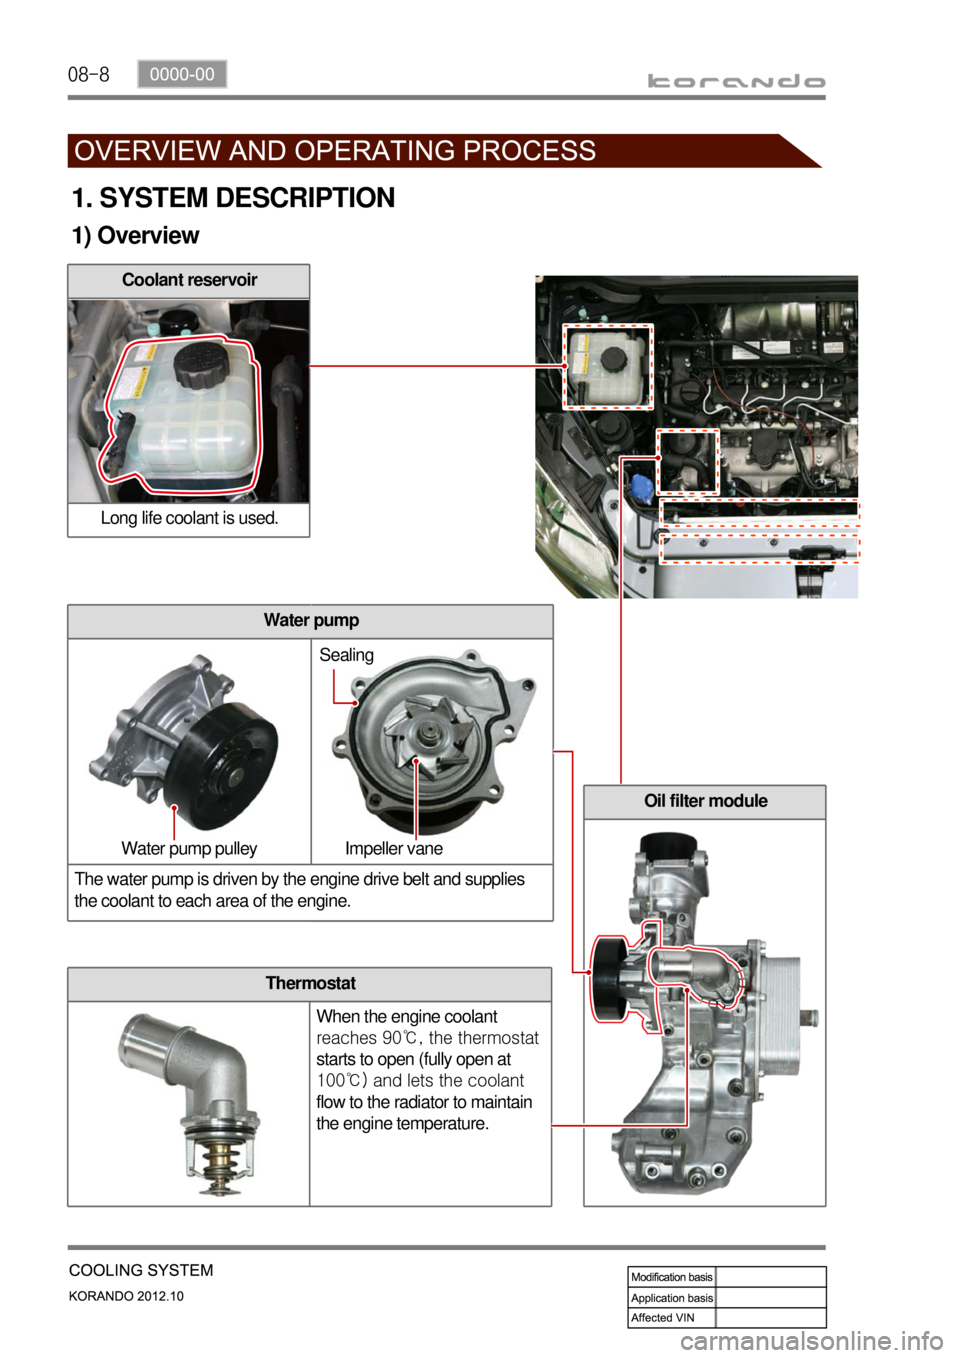 SSANGYONG KORANDO 2012  Service Manual 08-8
Thermostat
When the engine coolant 
reaches 90℃, the thermostat 
starts to open (fully open at 
100℃) and lets the coolant 
flow to the radiator to maintain 
the engine temperature.
1. SYSTEM